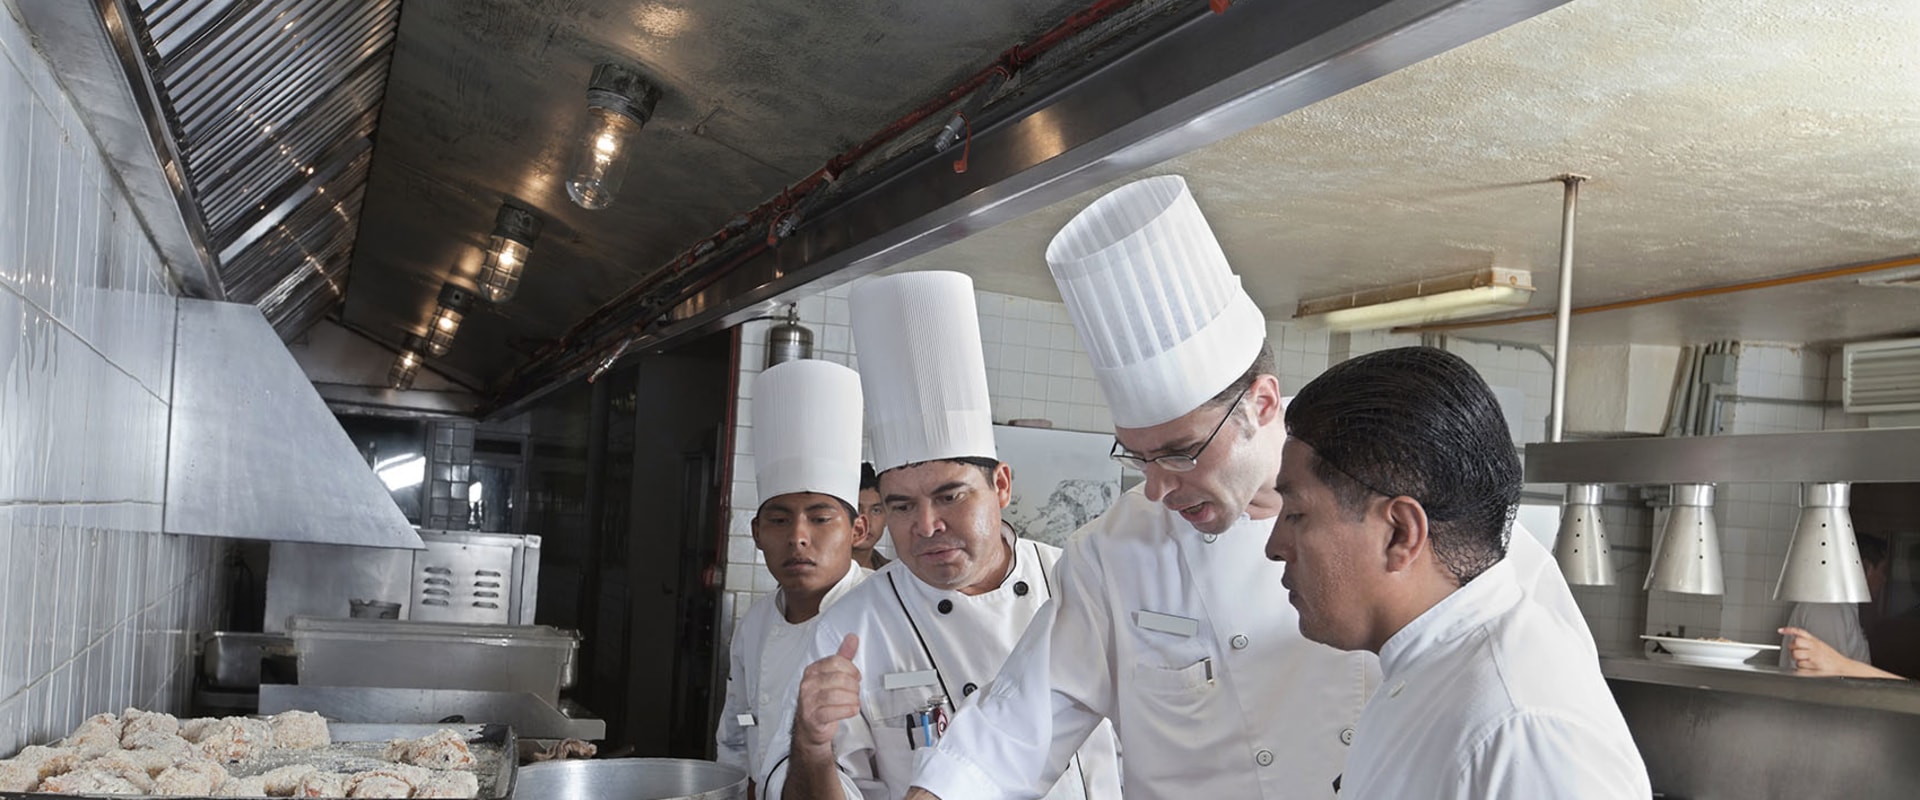 What excites you about working in the food industry?